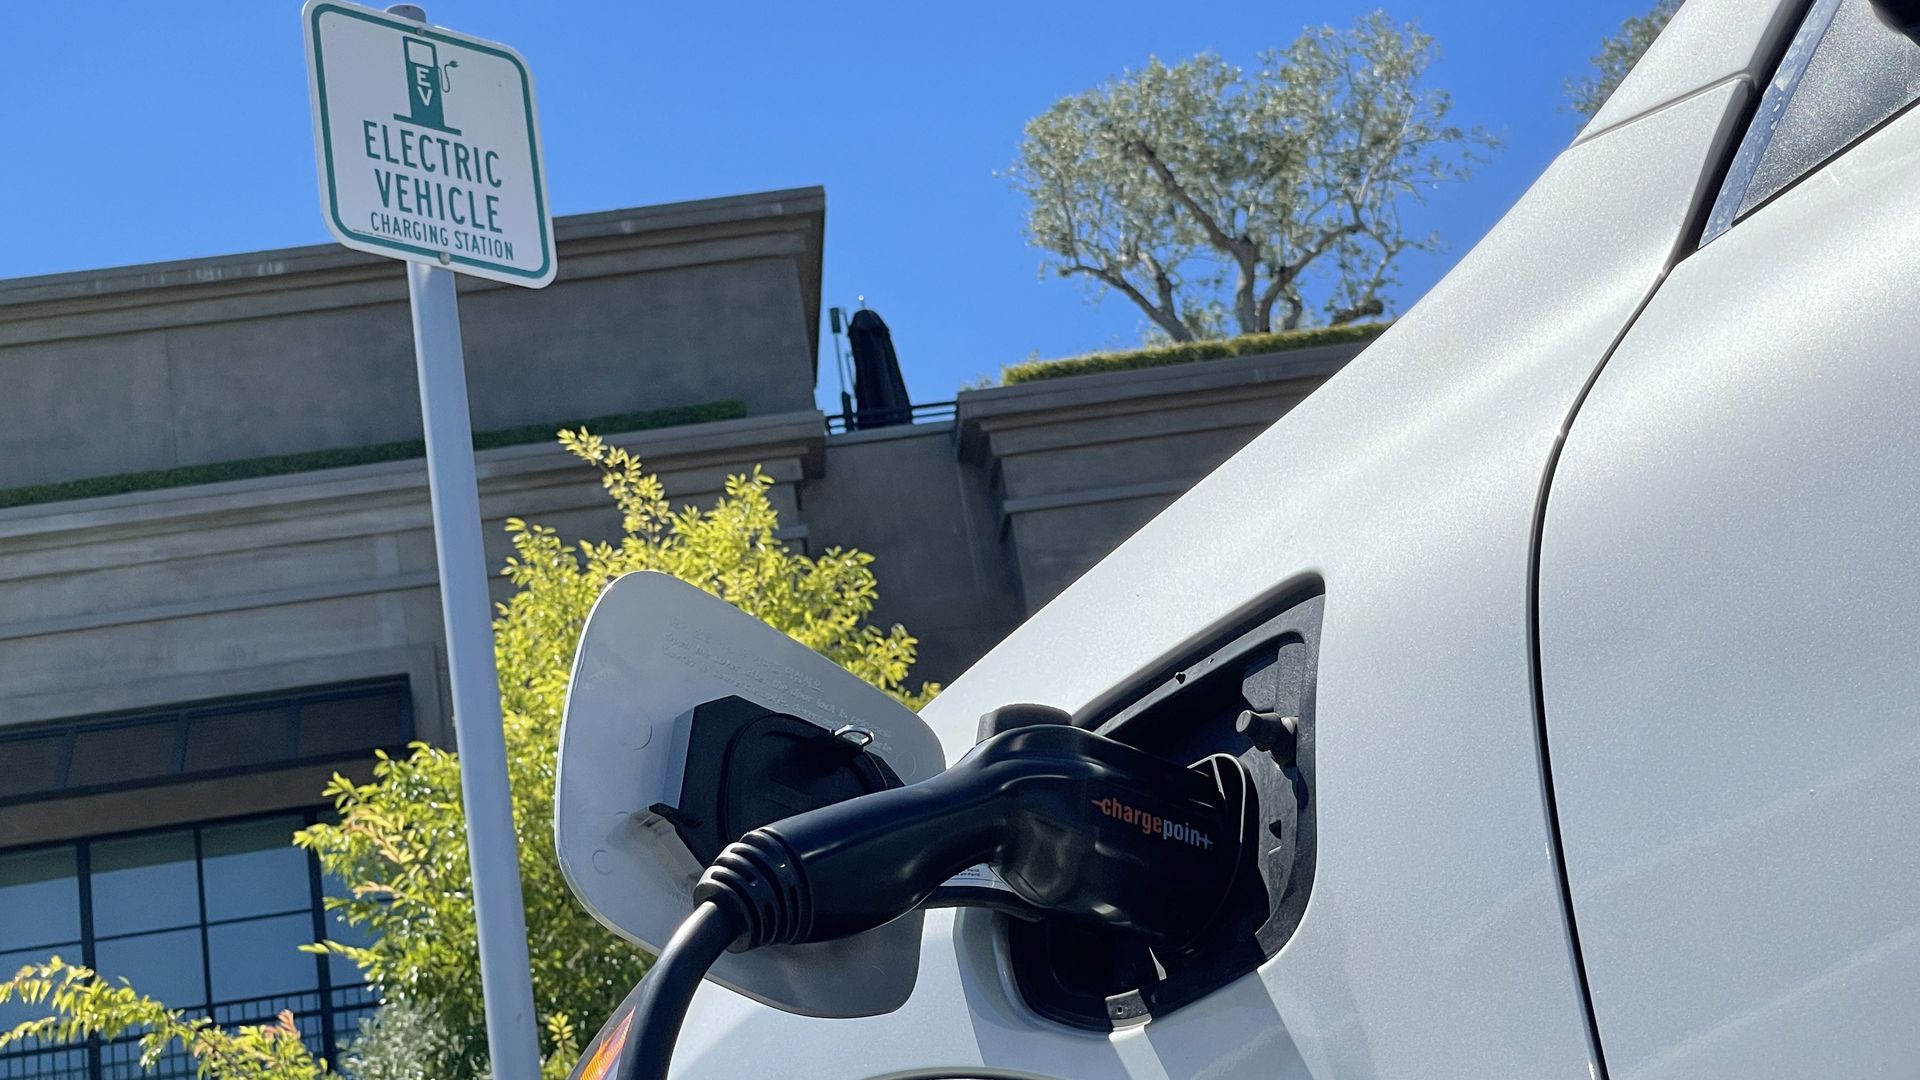 An electric car charges at a mall parking lot on June 27, 2022 in Corte Madera, California.